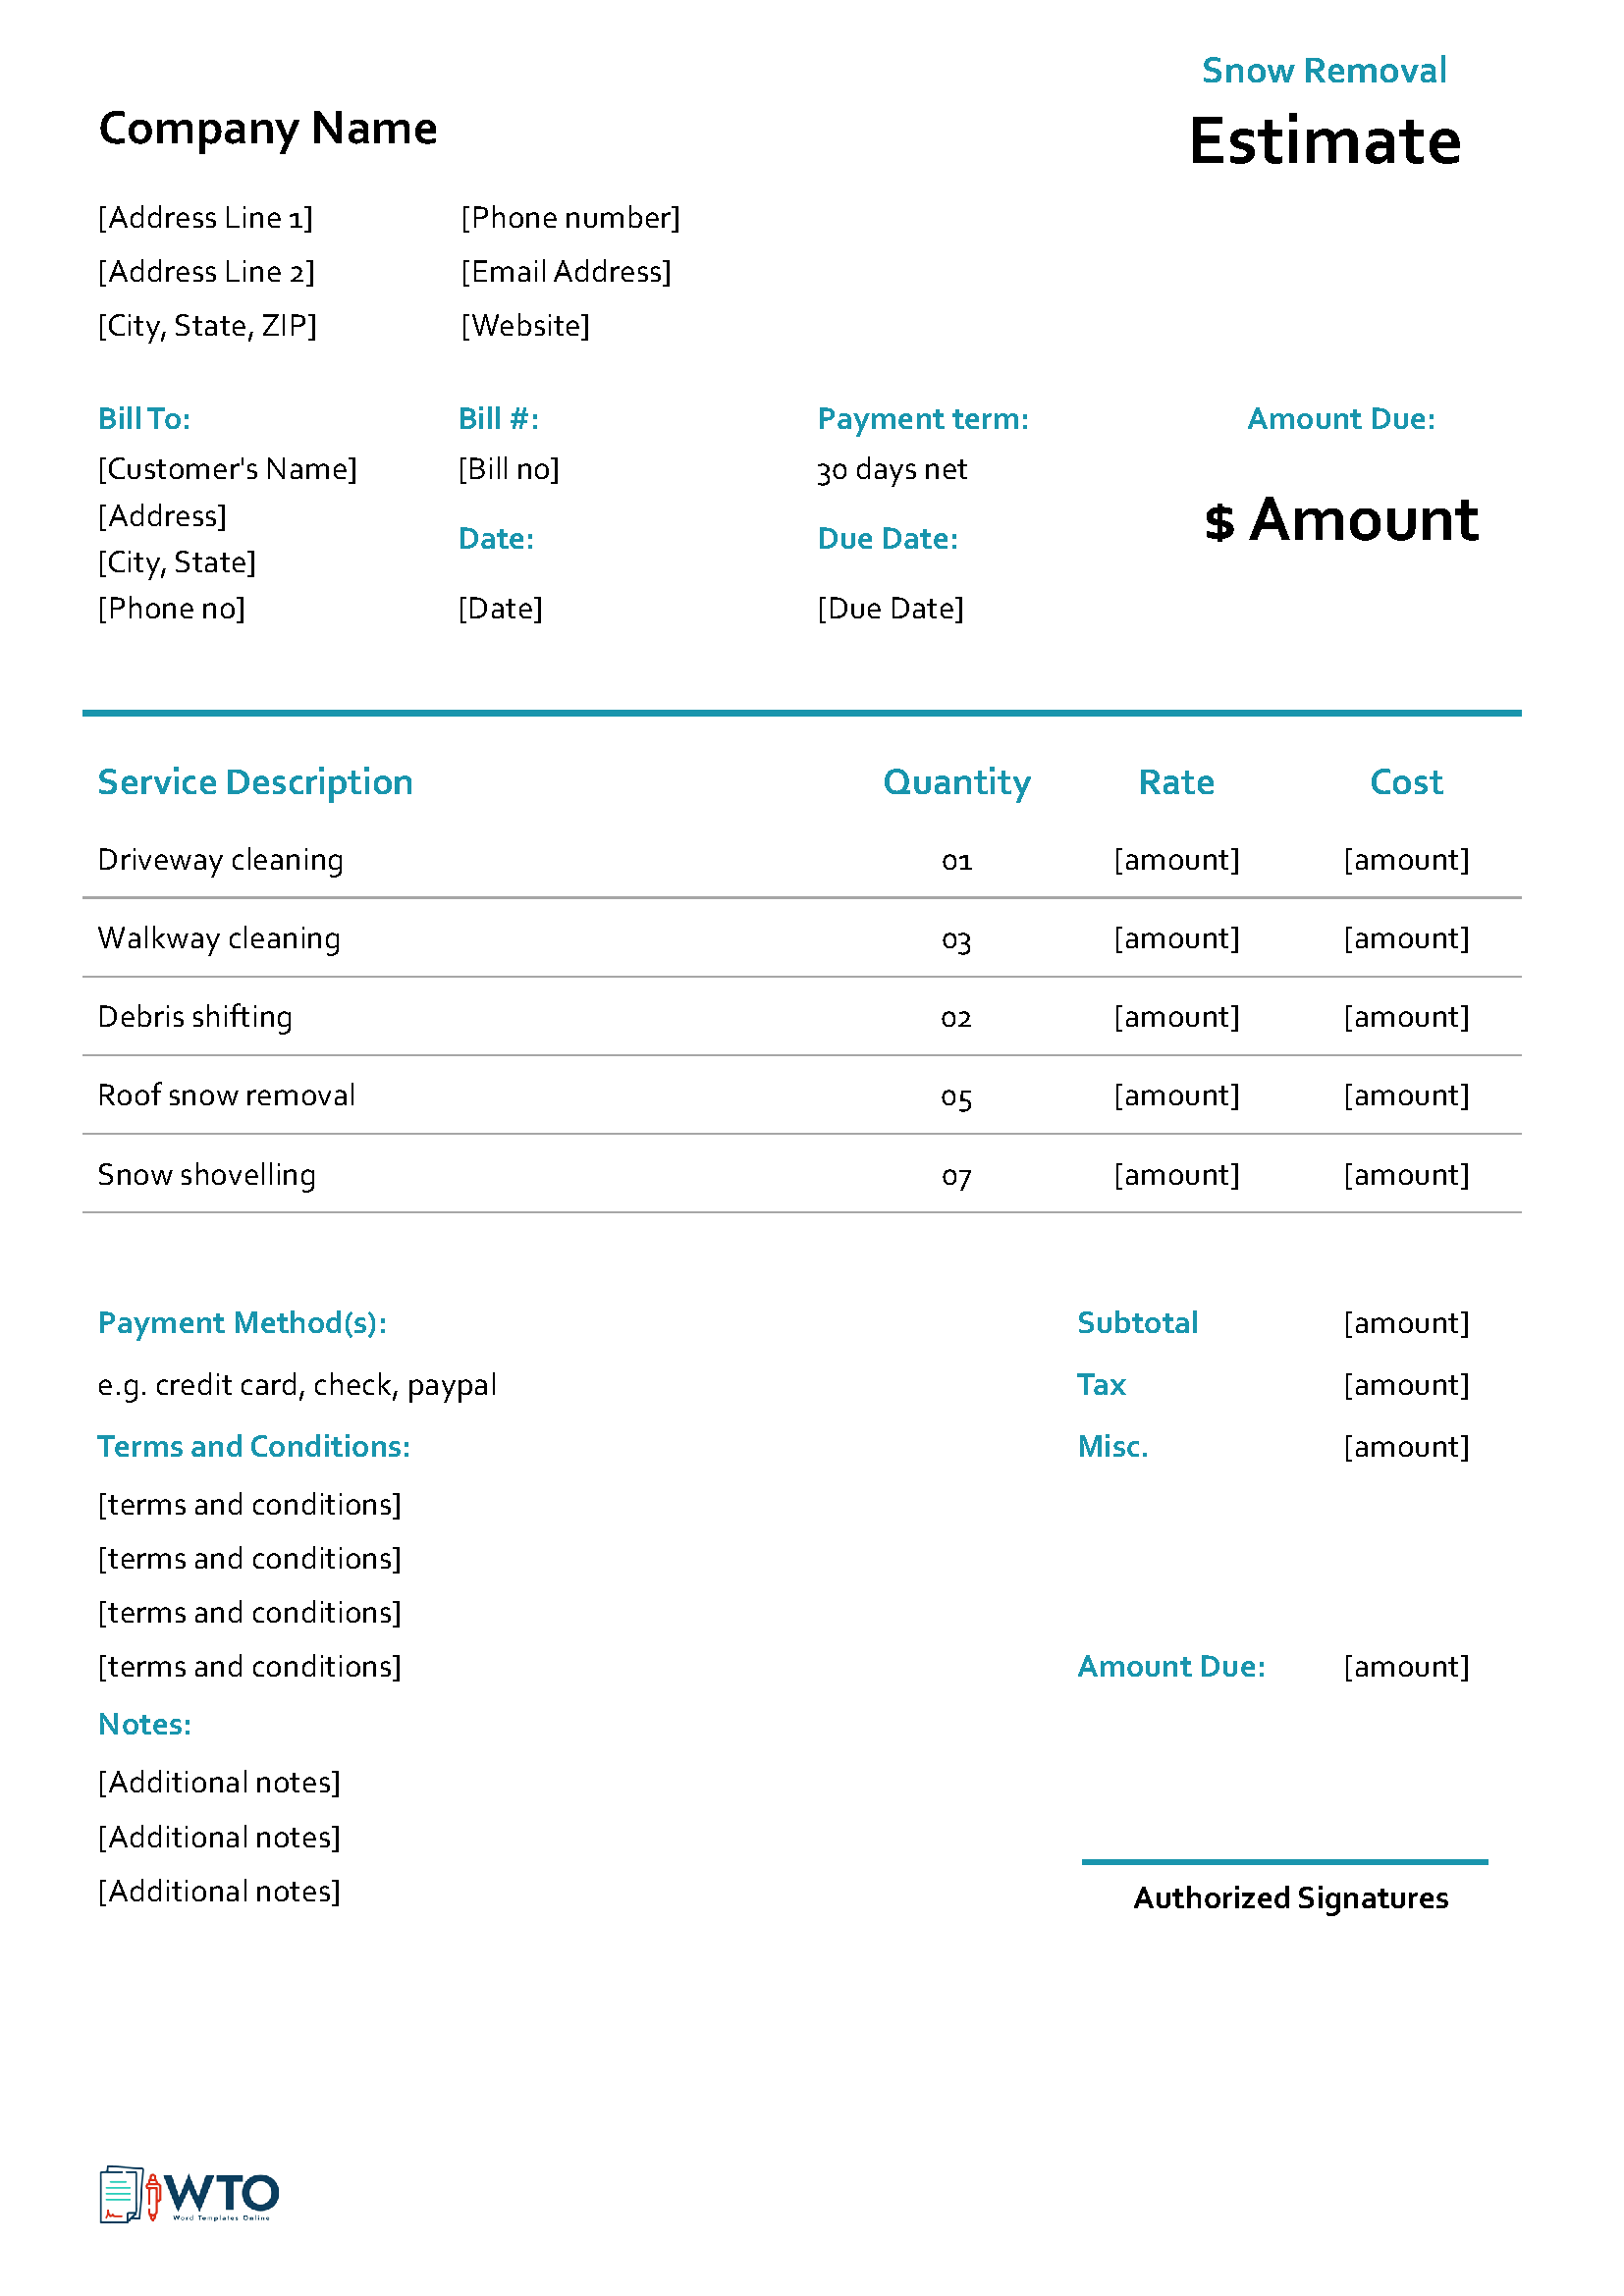 Free Snow Removal Estimate Template: Get Your Sample and Example Format